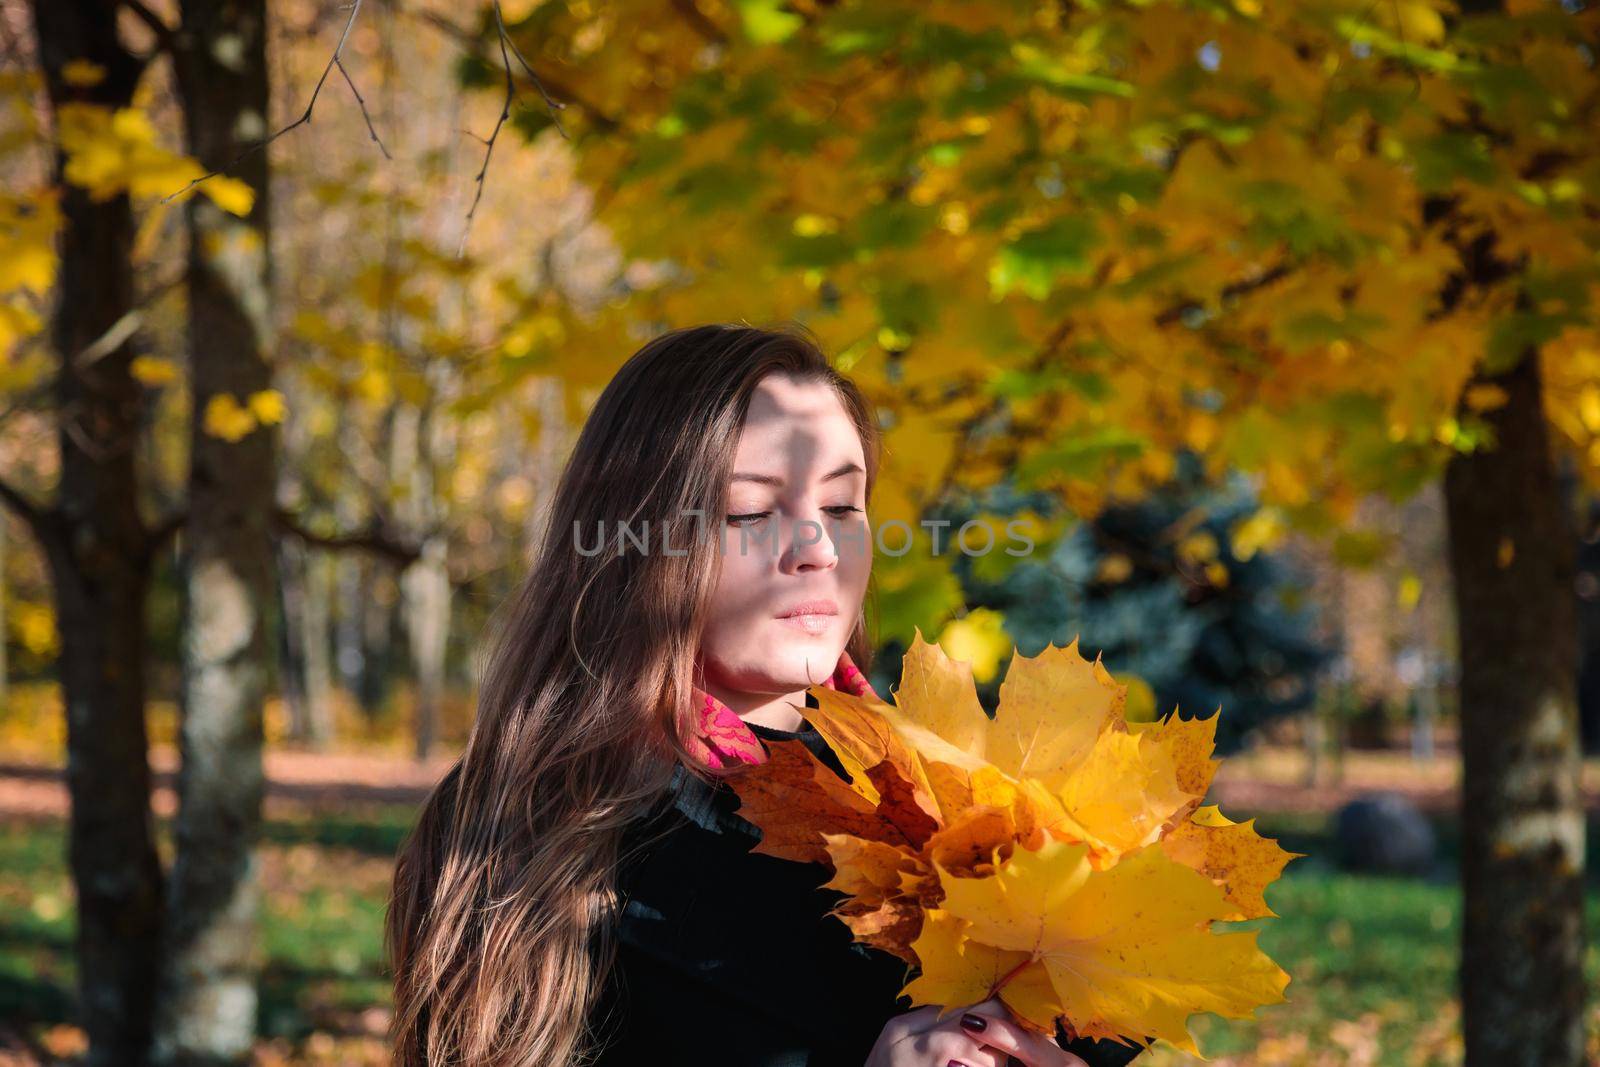 A woman with long hair looks at yellow leaves in an autumn park. Autumn season.